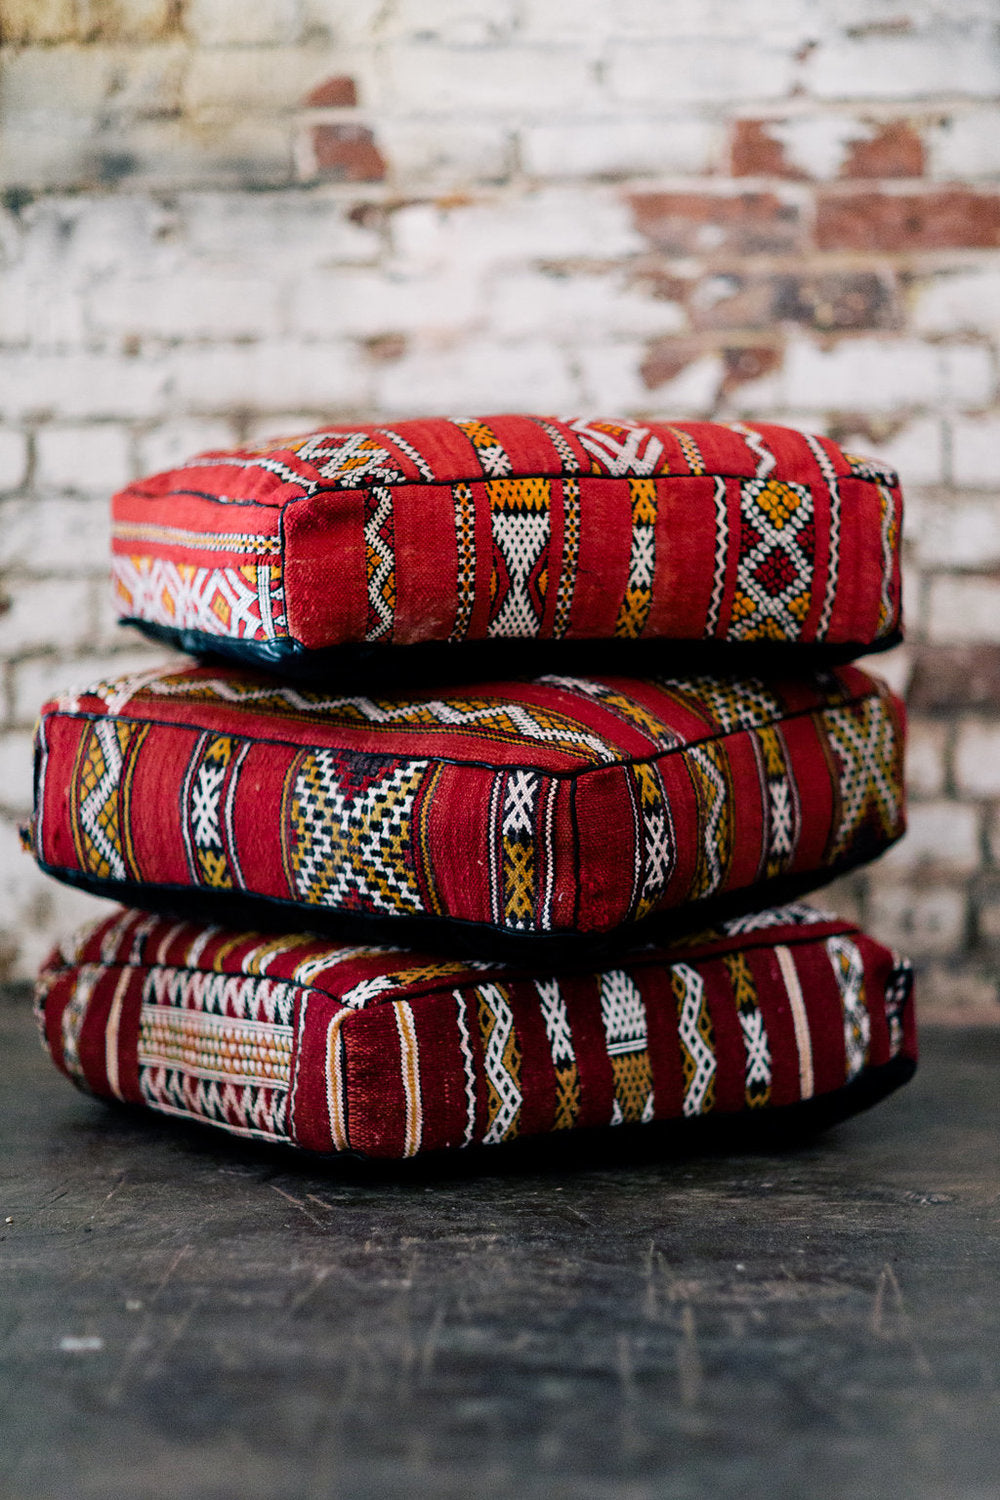 Moroccan Floor Cushions Vintage Rugs Pouffes and footstools - Authentic Moroccan